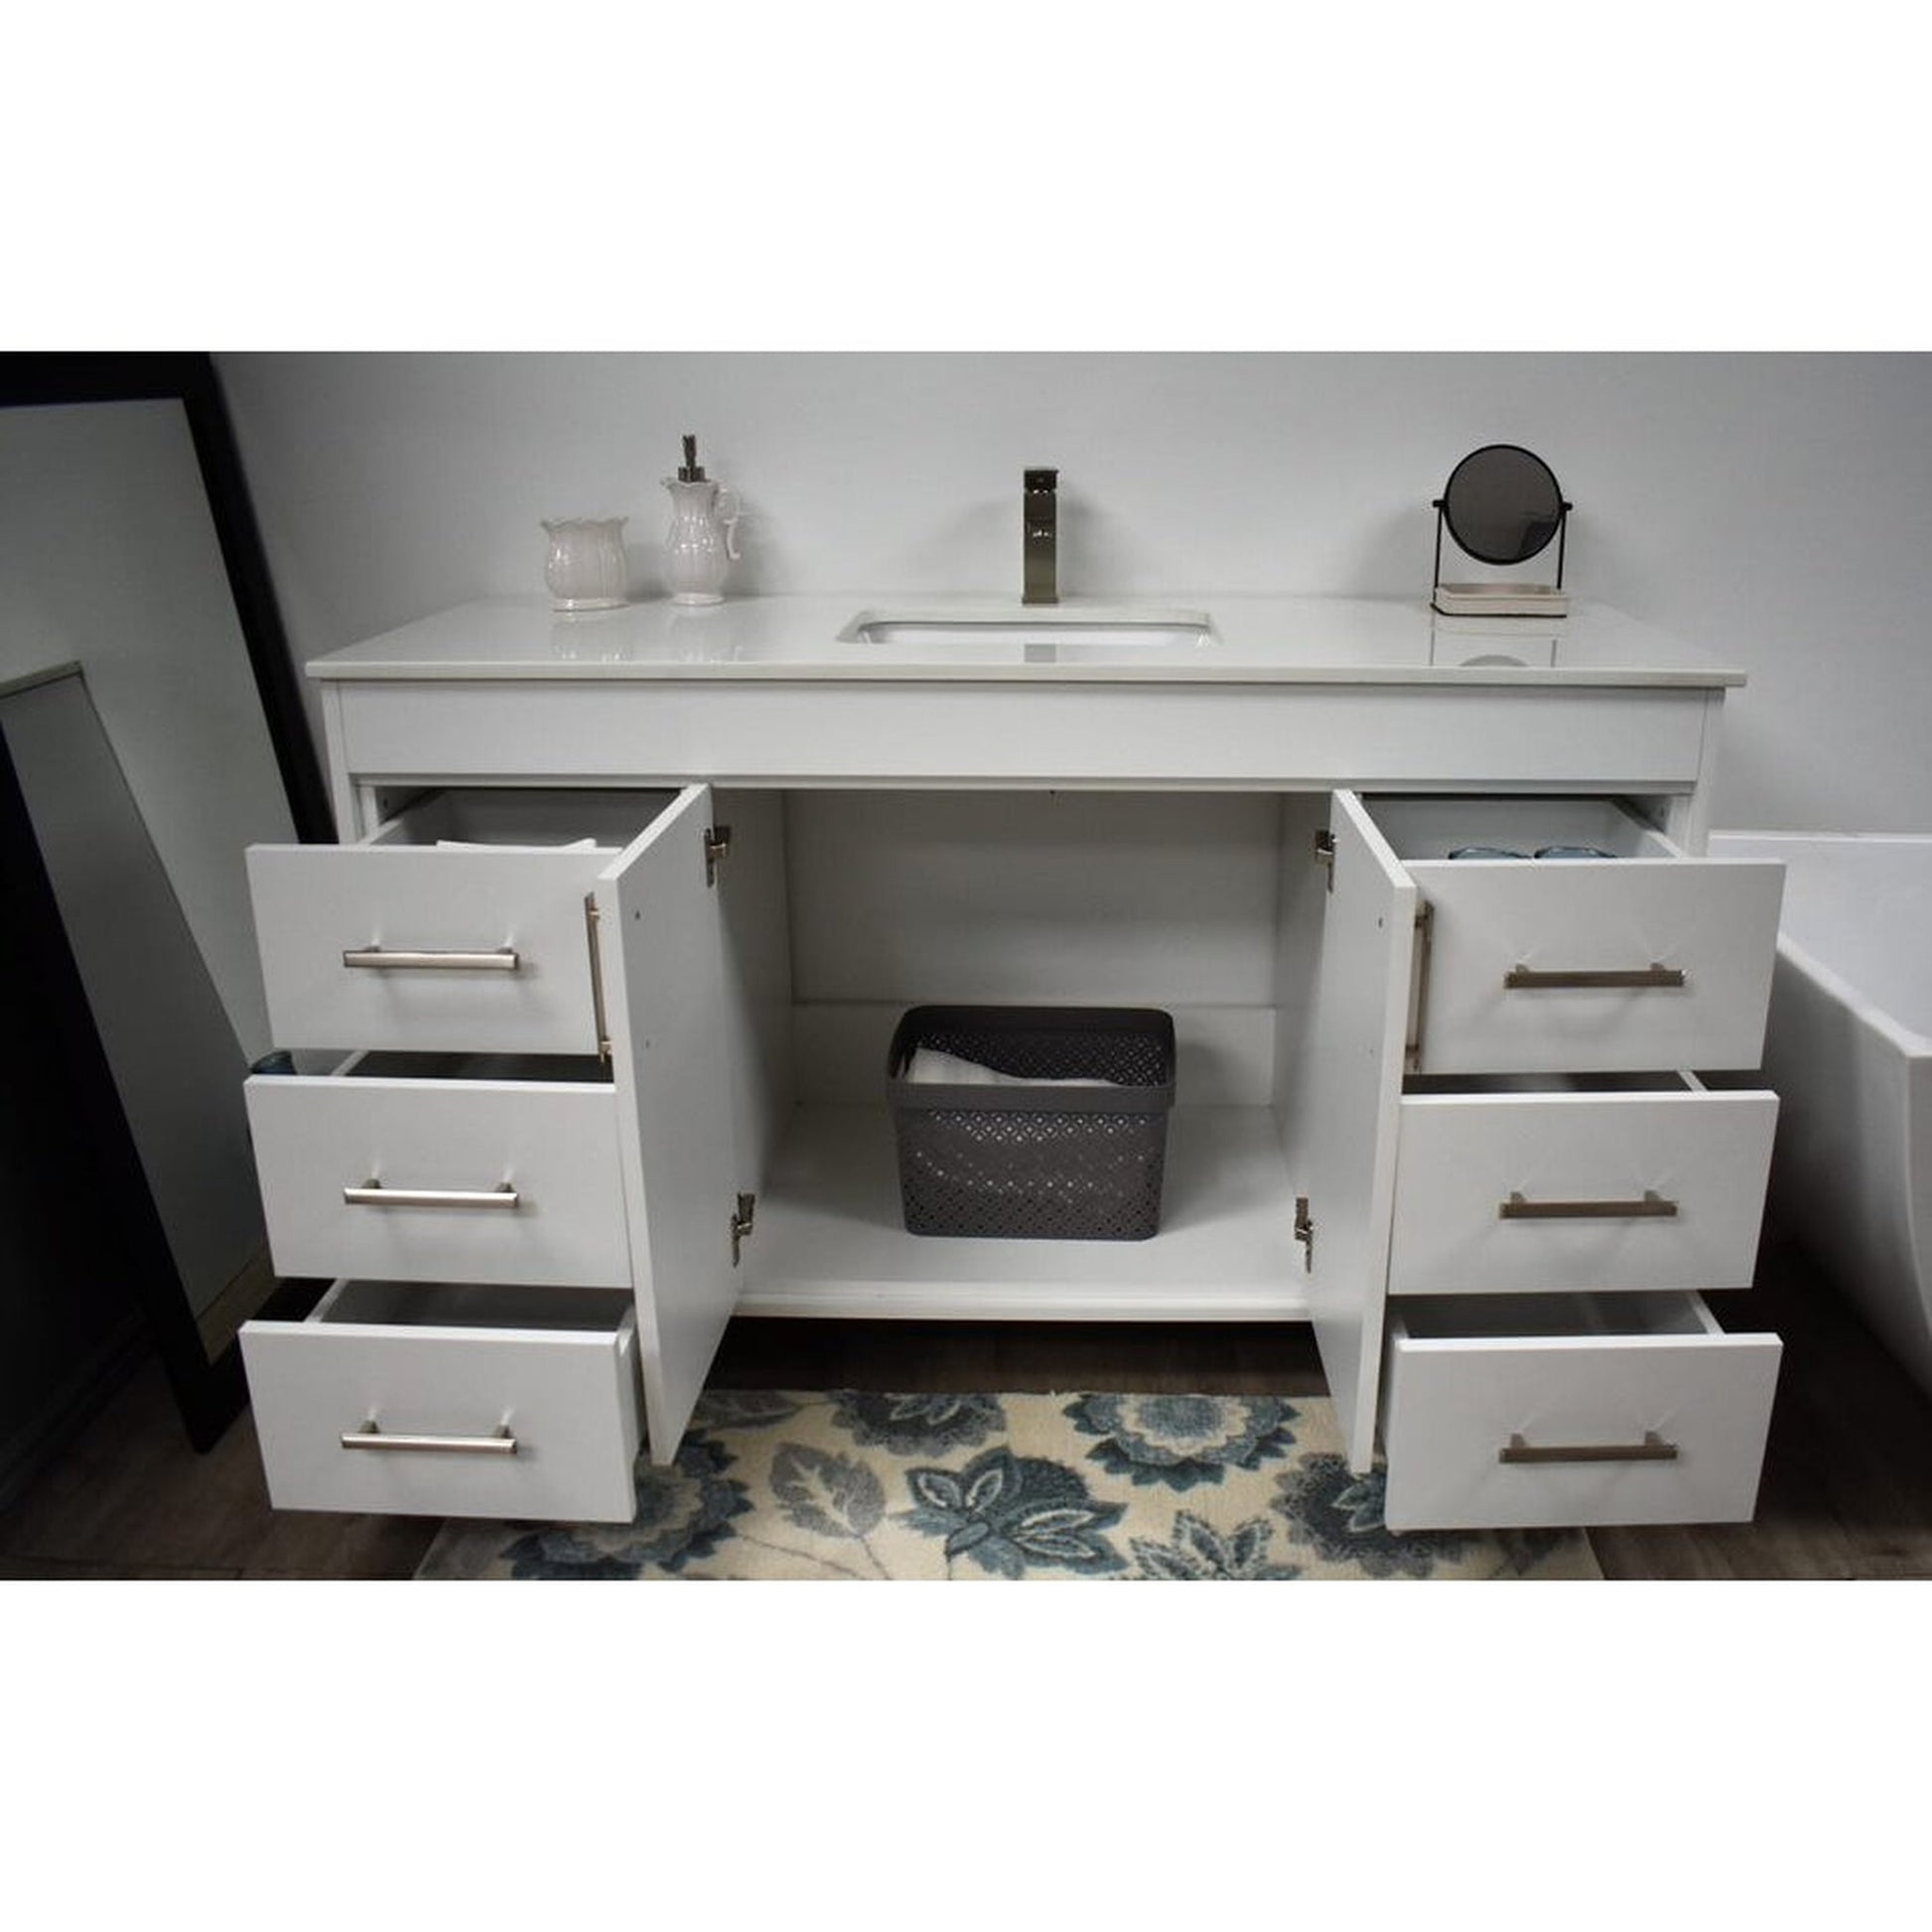 Volpa USA Capri 60" x 22" White Freestanding Modern Bathroom Vanity With Undermount Single Sink and White Microstone Top With Brushed Nickel Edge Handles